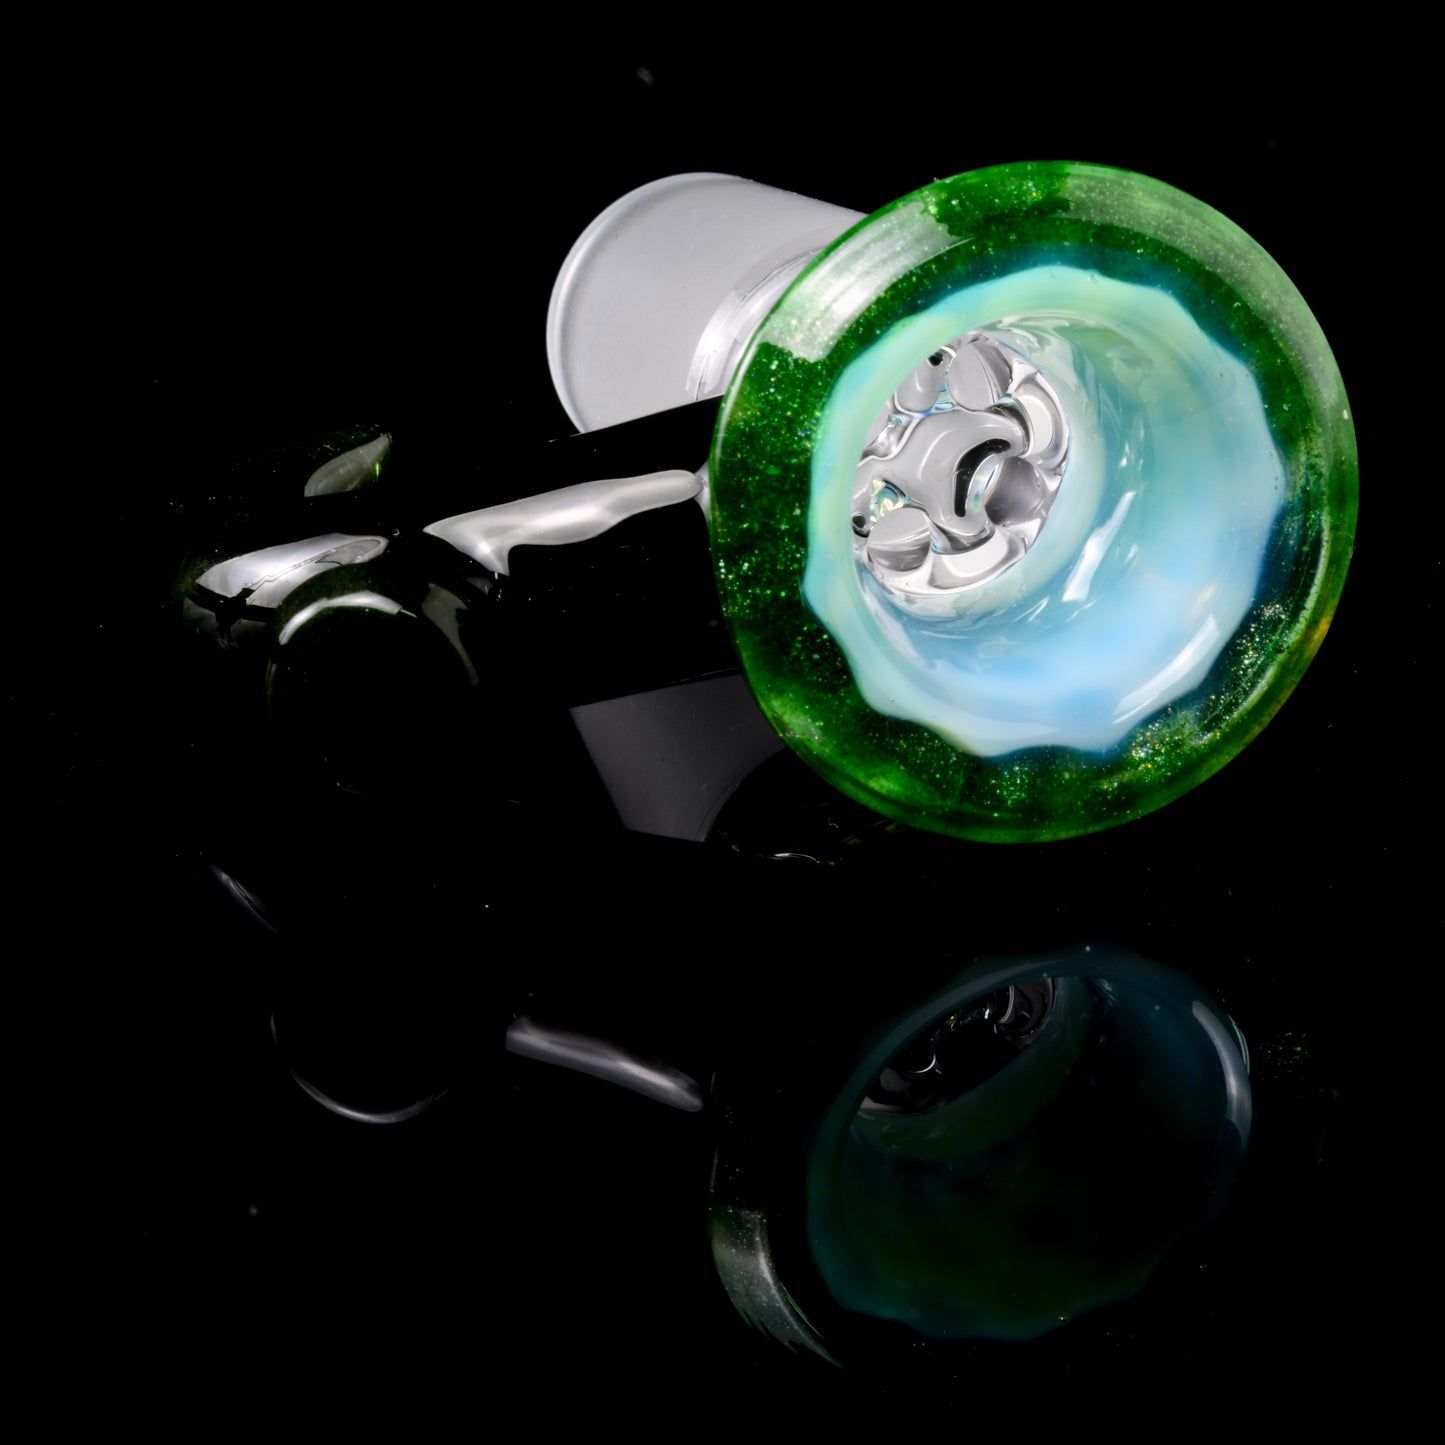 Jamms Glass - 18mm 4 Hole Honeycomb Slide - Green Stardust Over Ghost